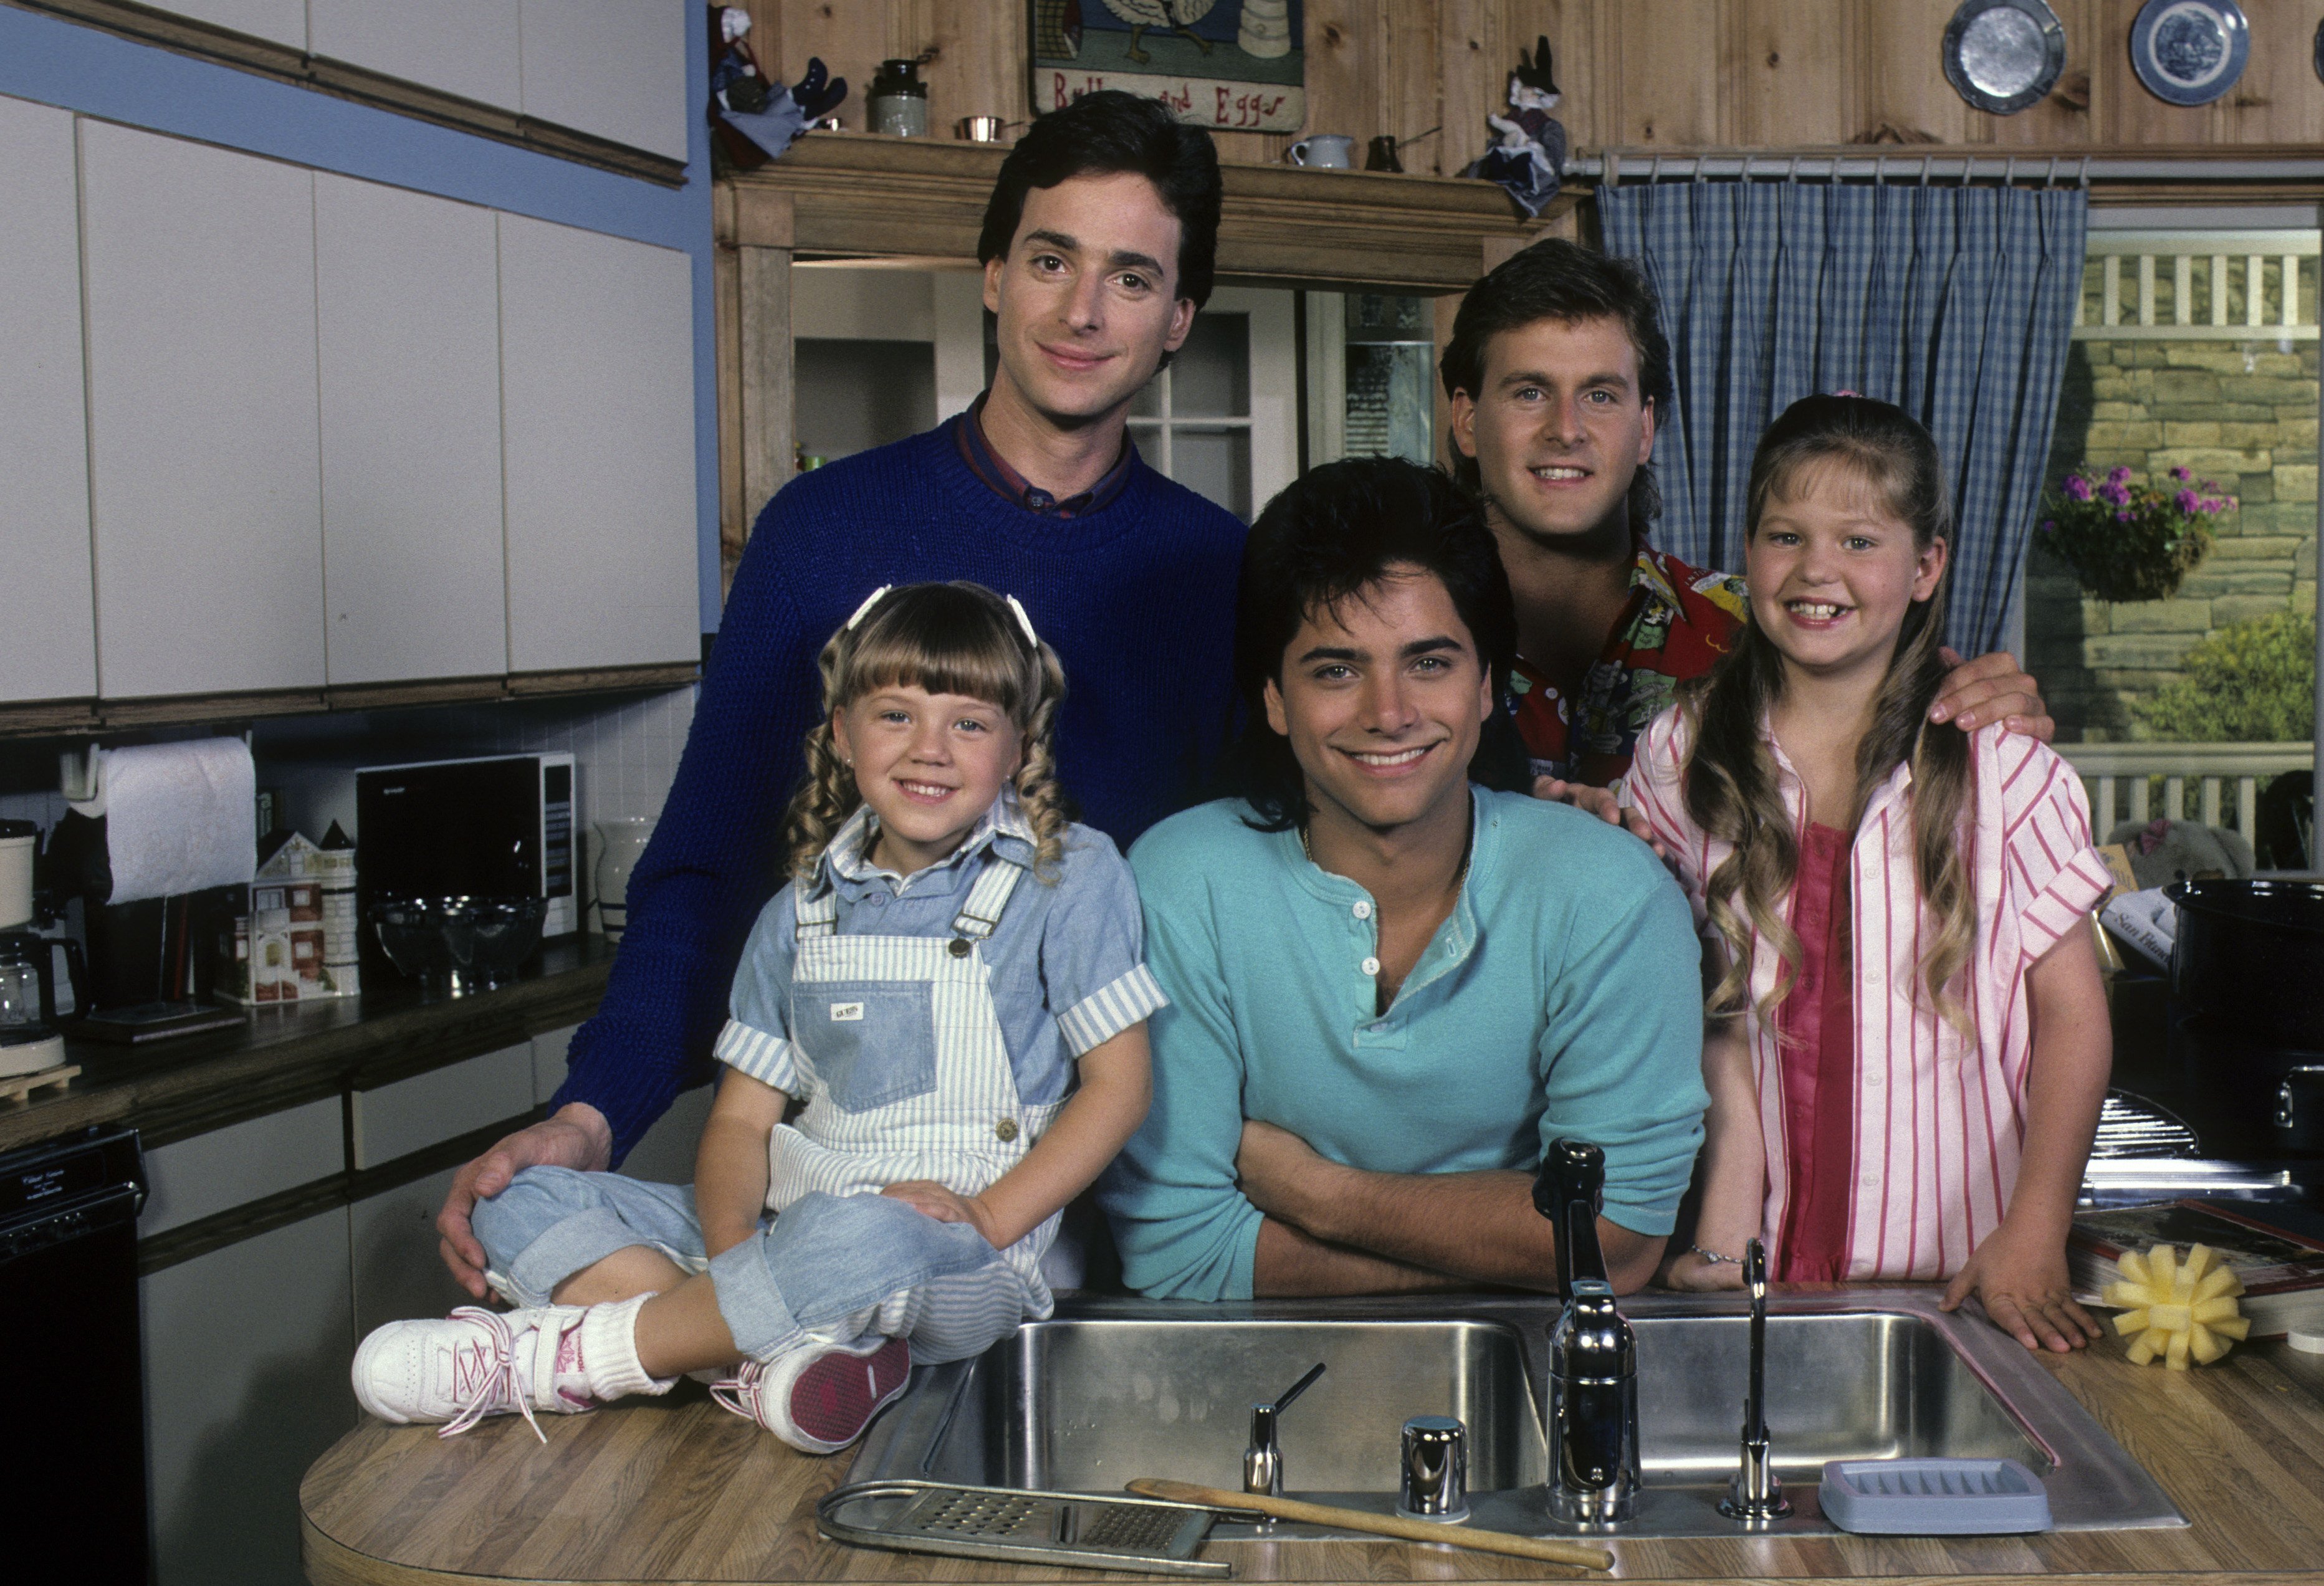 The 'Full House' cast smiling for the camera